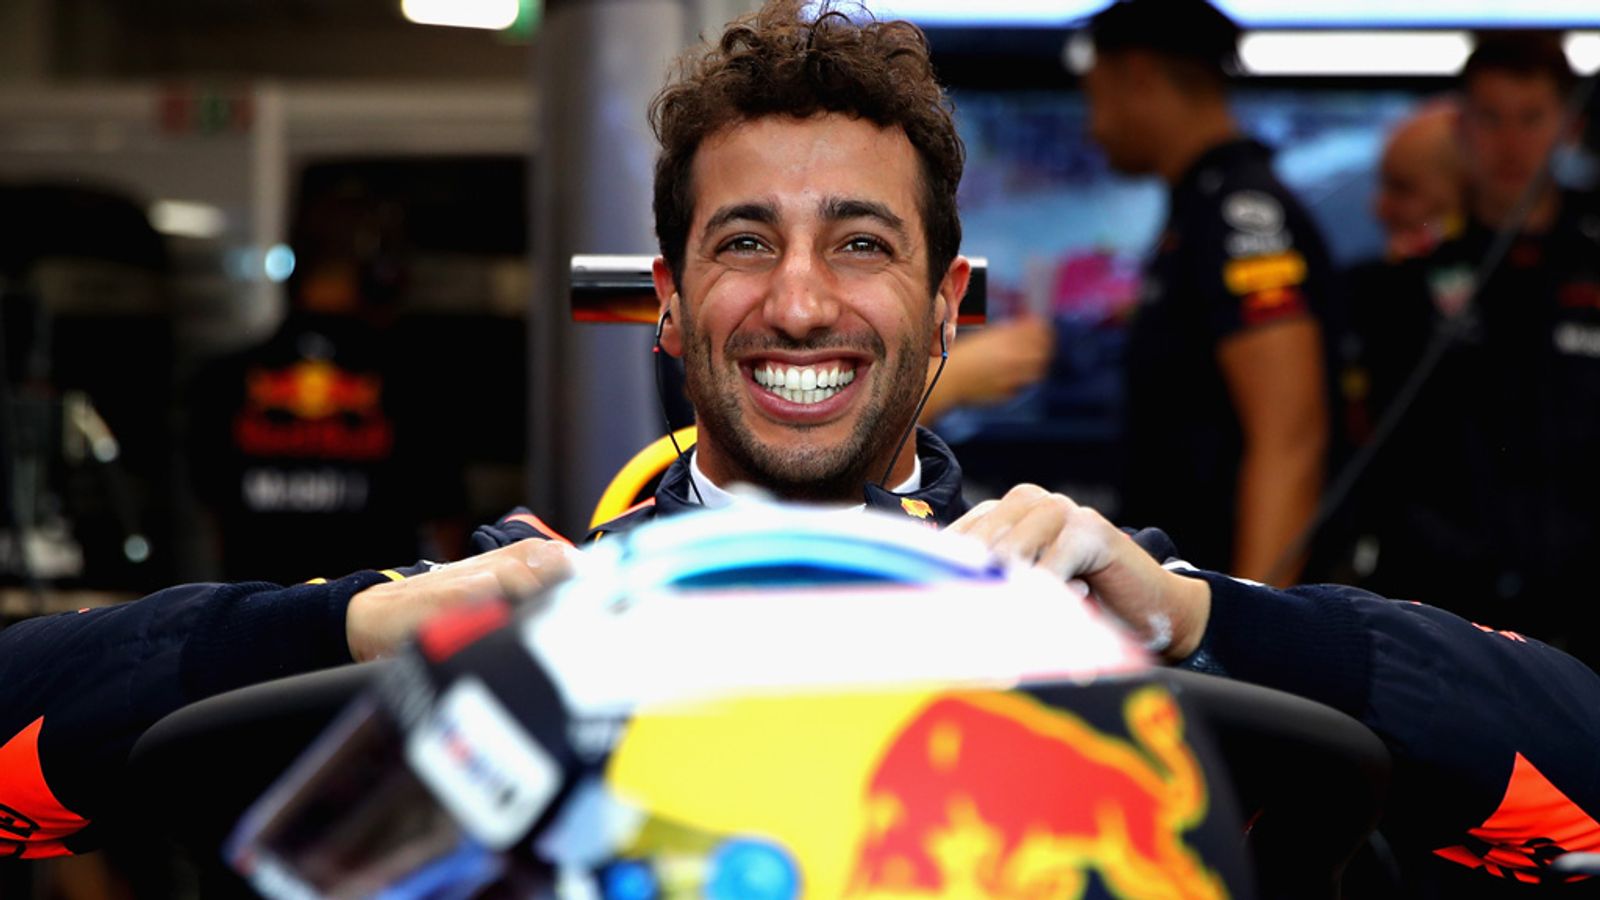 Daniel Ricciardo excited for fresh start at Renault in F1 2019 | F1 News